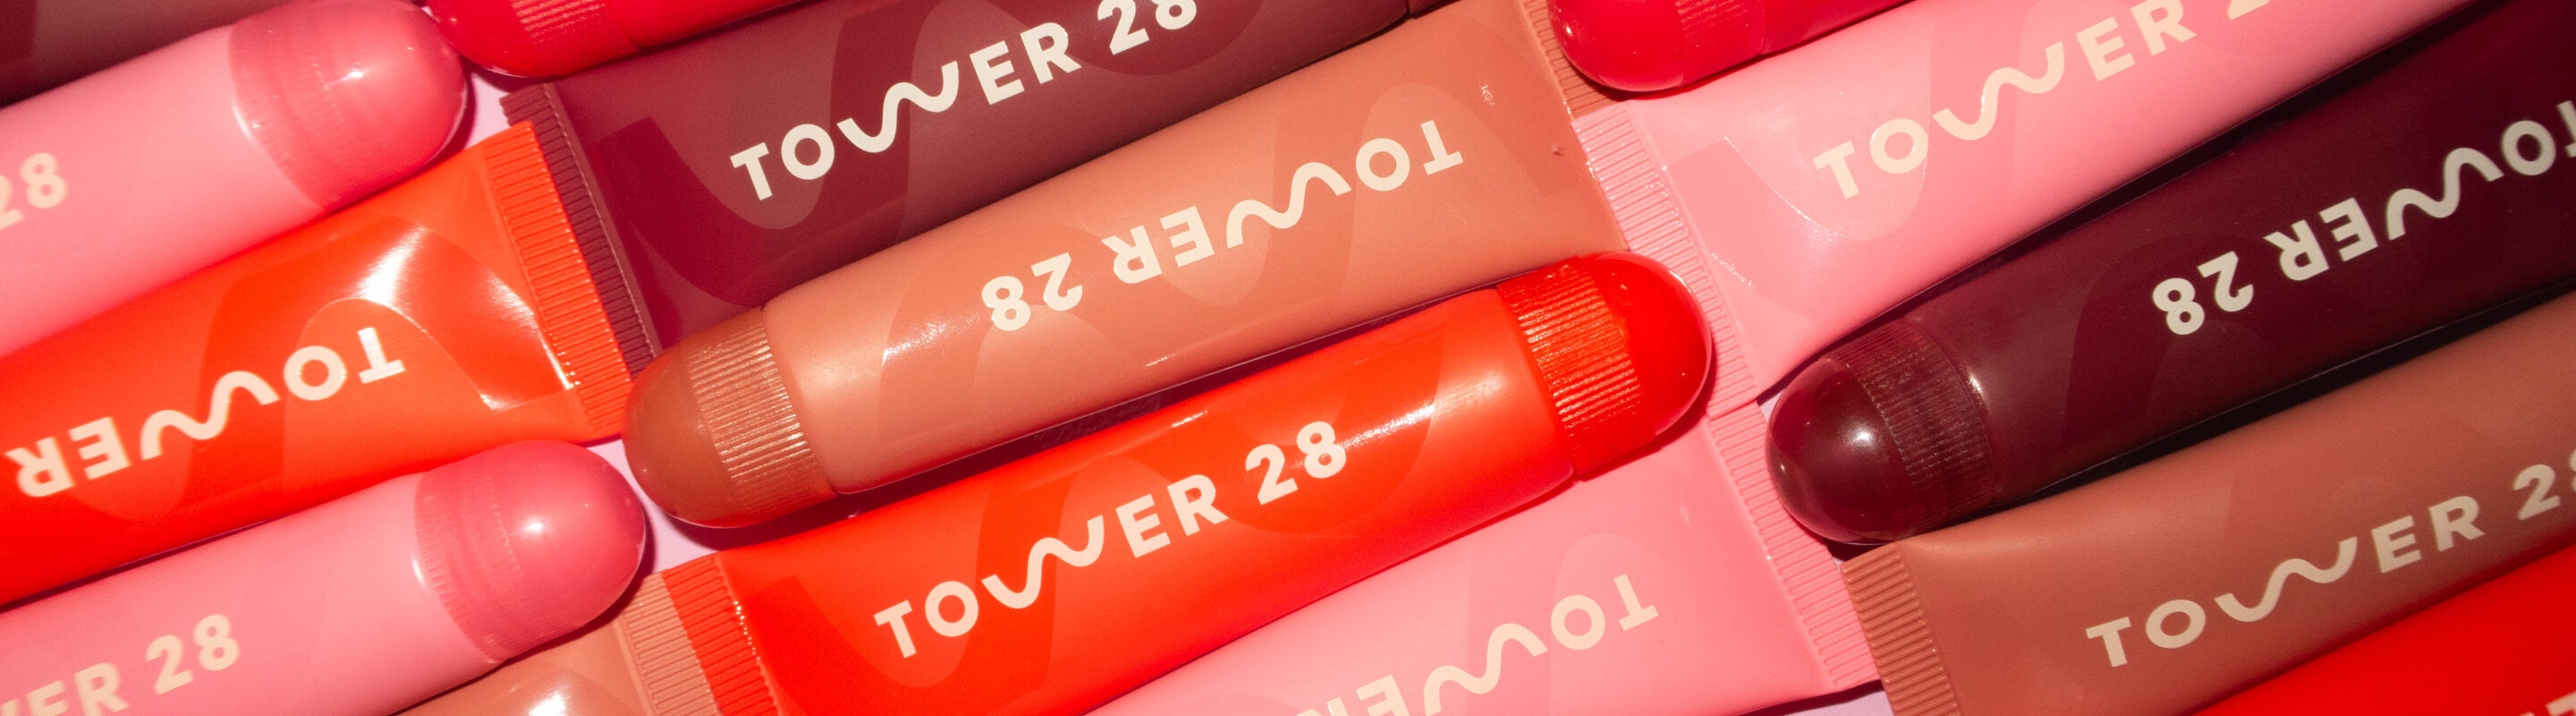 Group shot of full-range of Tower 28 Beauty's colorful LipSoftie Lip Treatments 